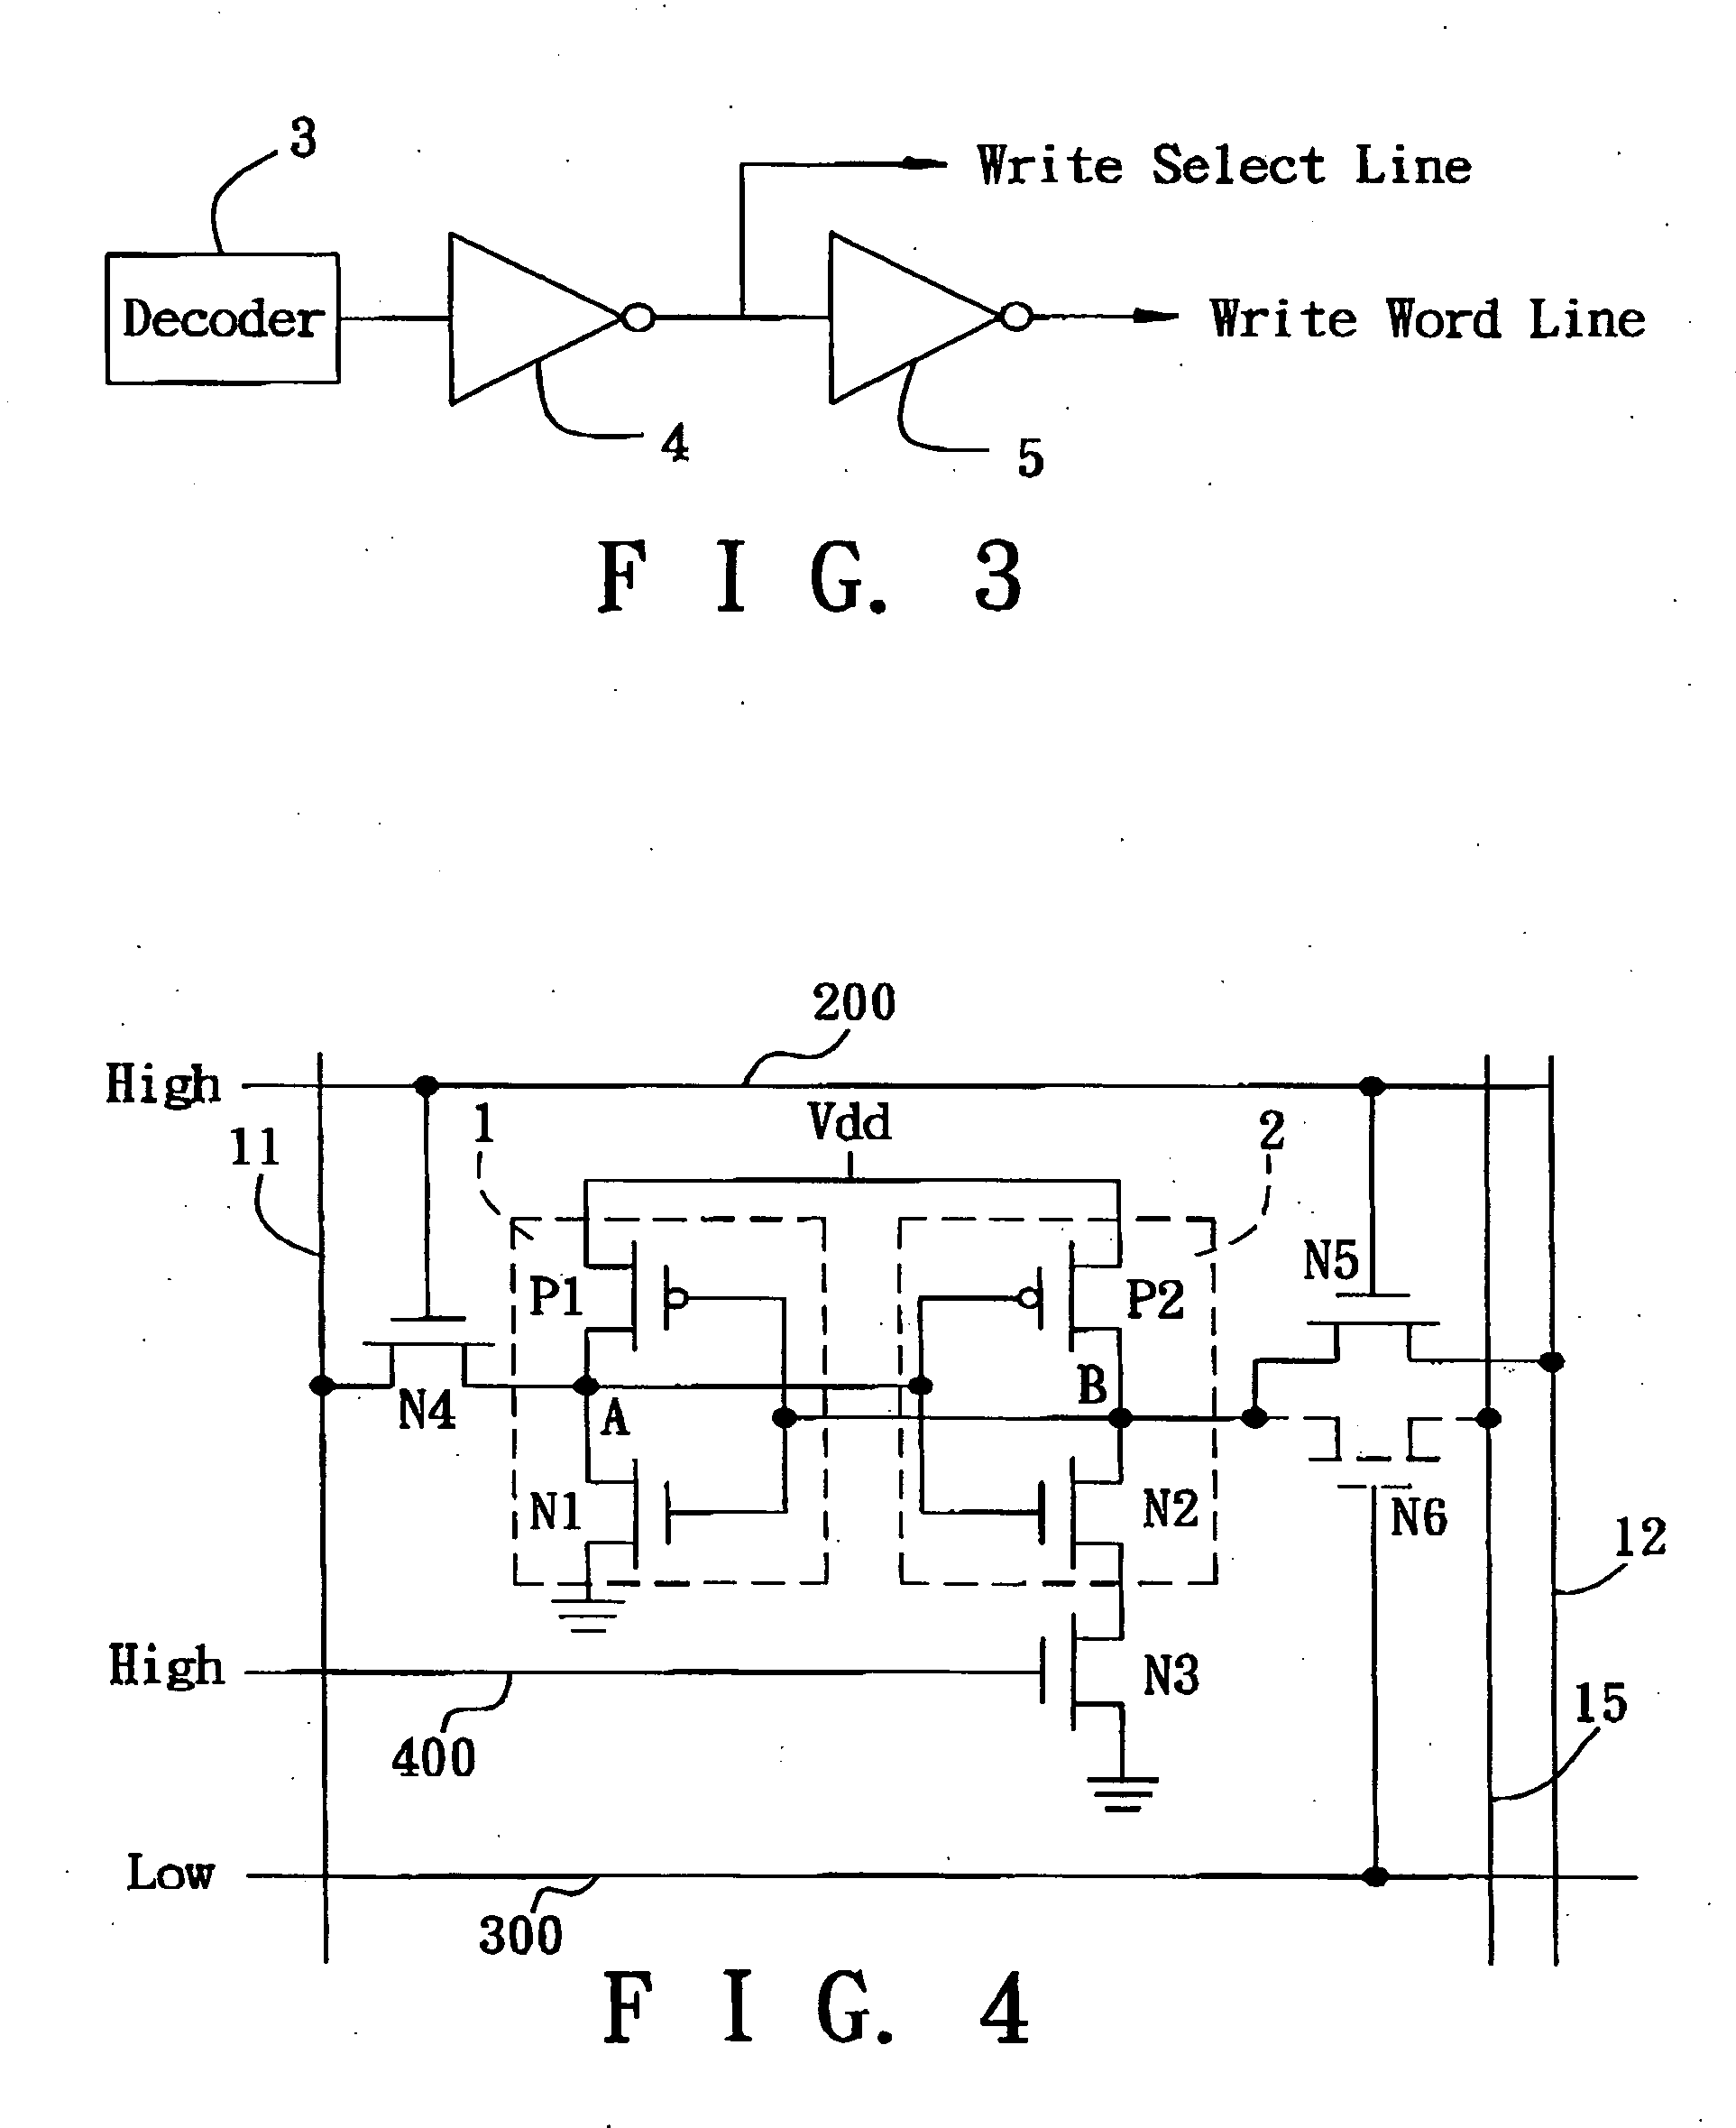 Low-power SRAM memory cell